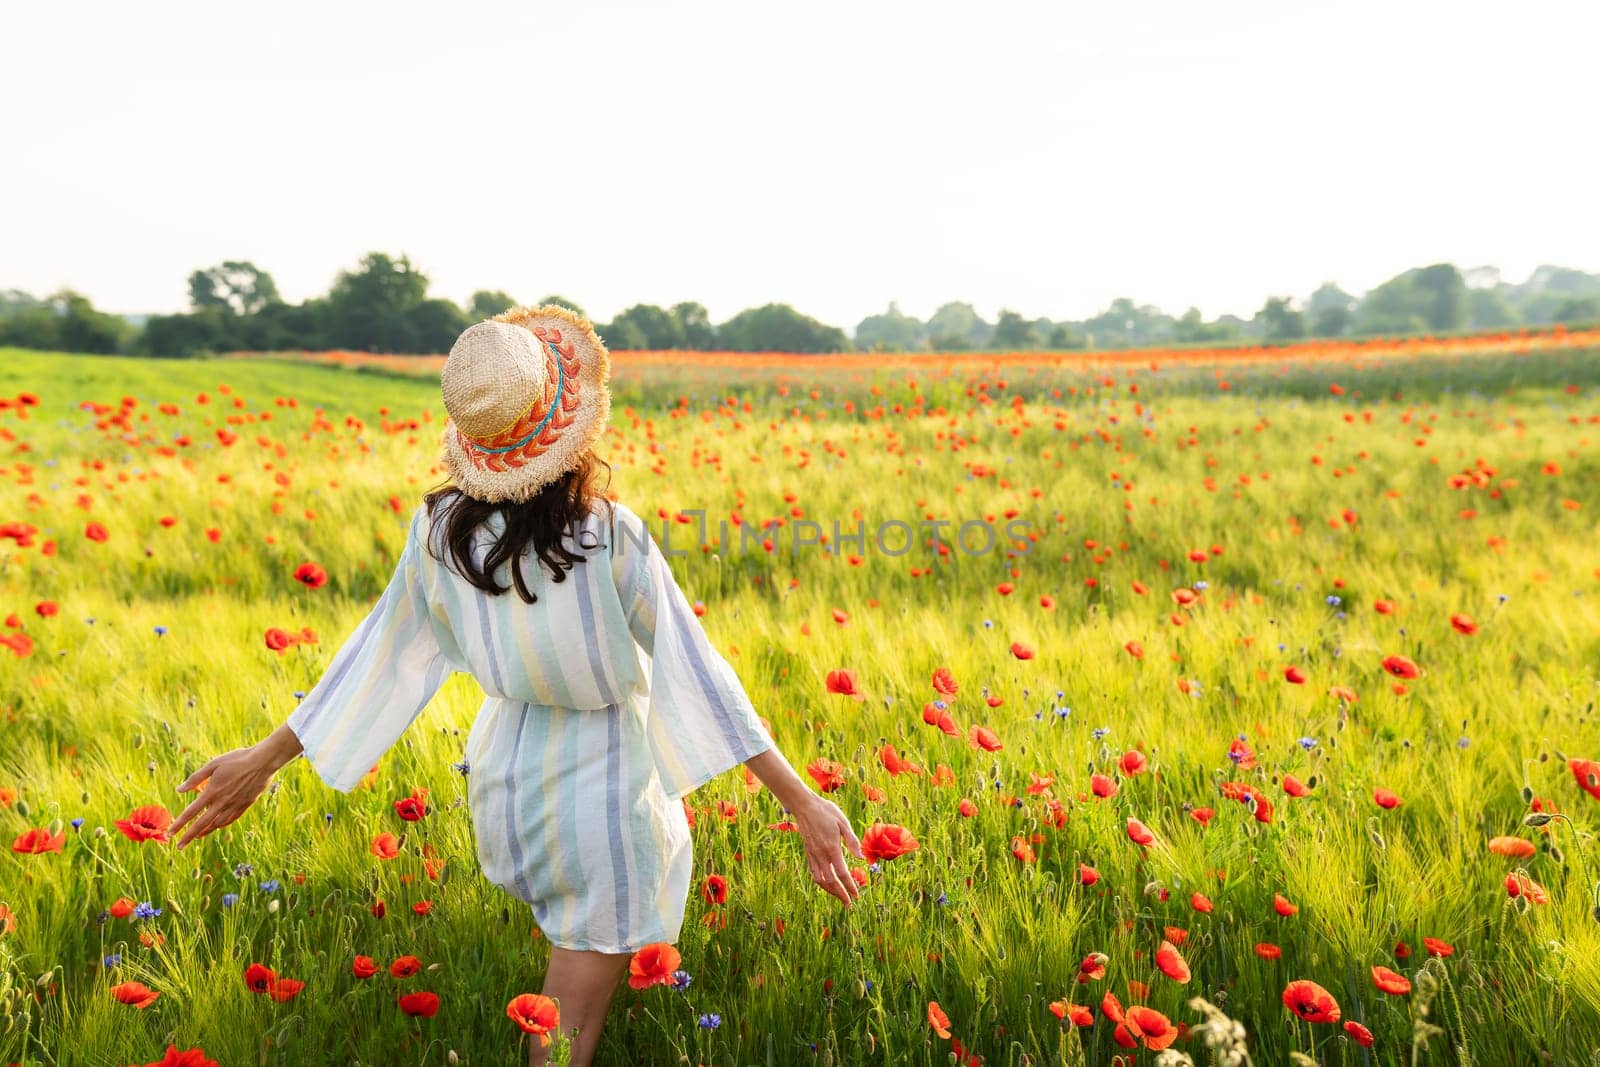 Sunrise in a beautiful wheat and poppy field. A happy girl in a straw hat and a white striped dress stands in the middle of a field, the sun shines in her face, joy, happiness